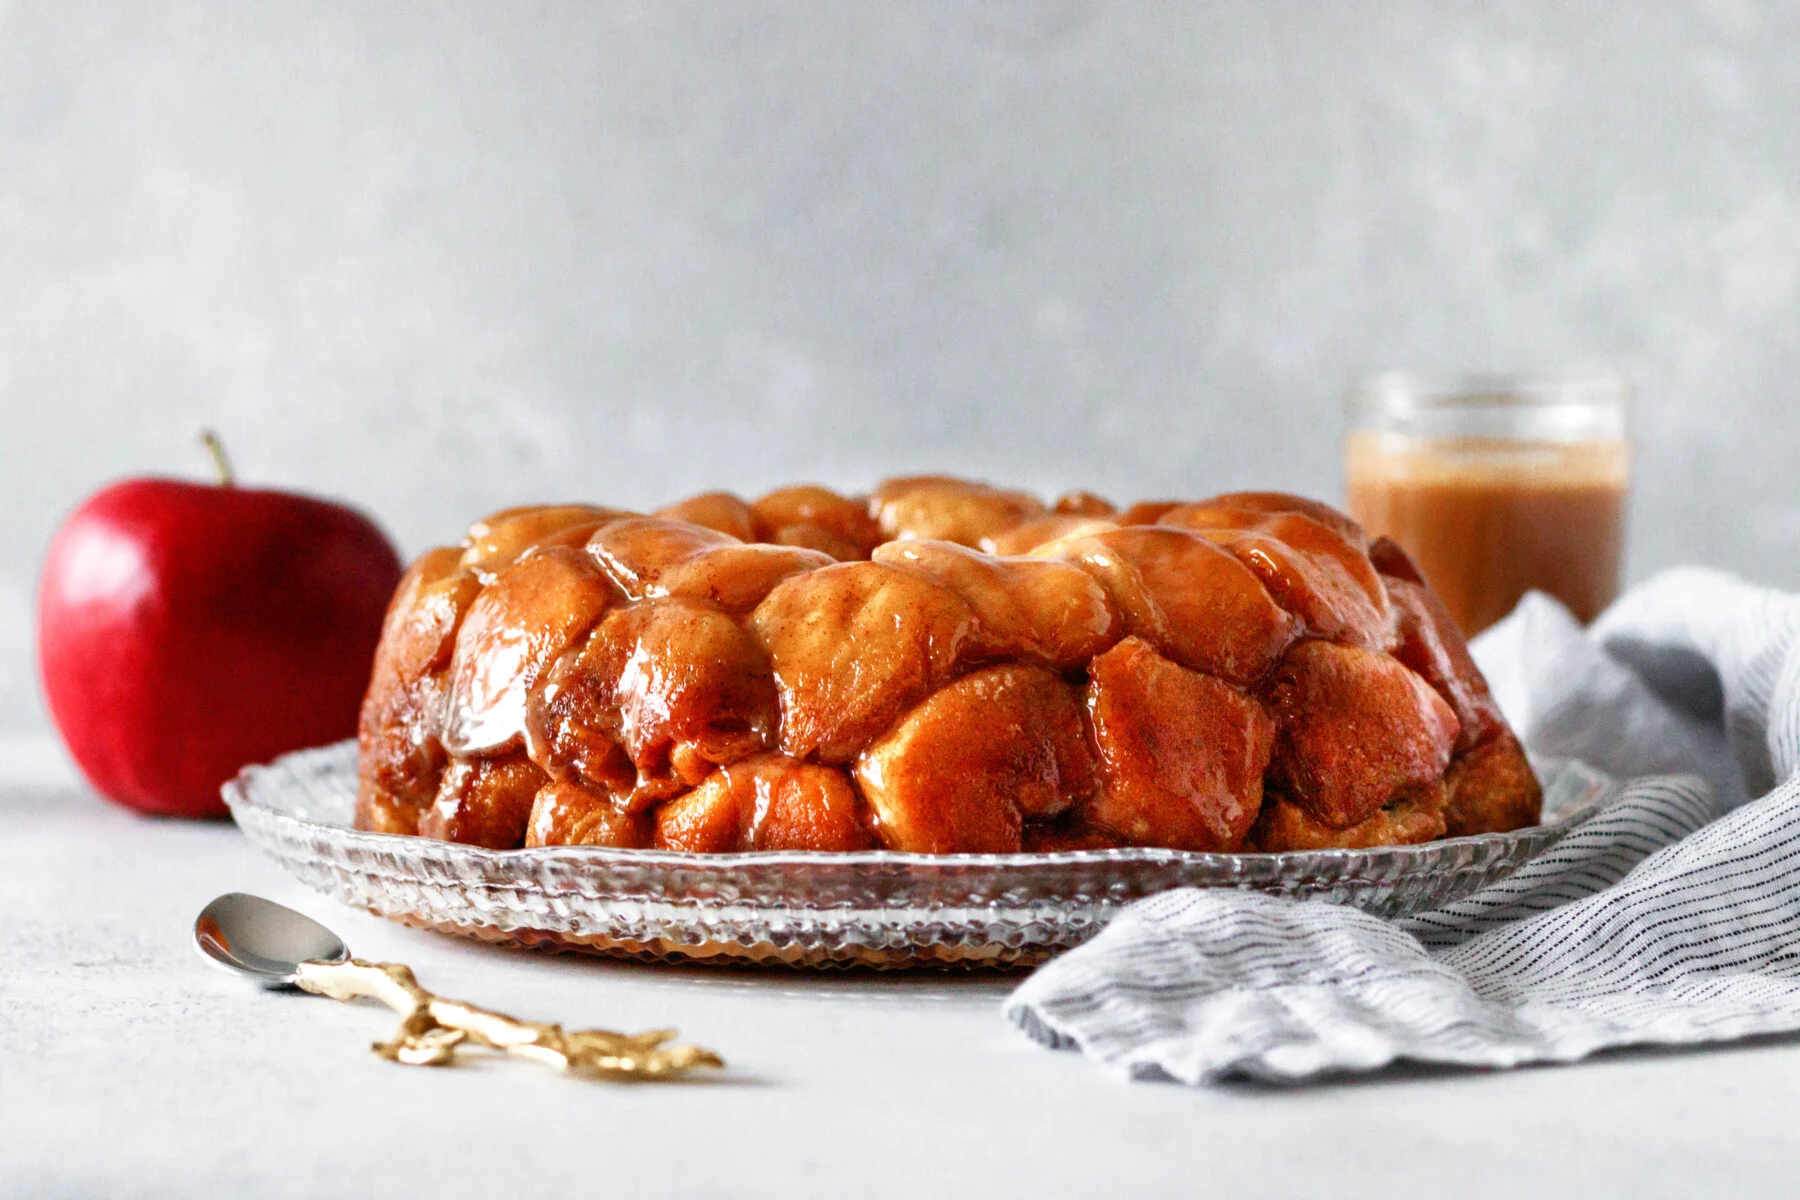 horizontal image of the baked monkey bread, gleaming on a cut glass plate set on a light photography drop with mottled grey background